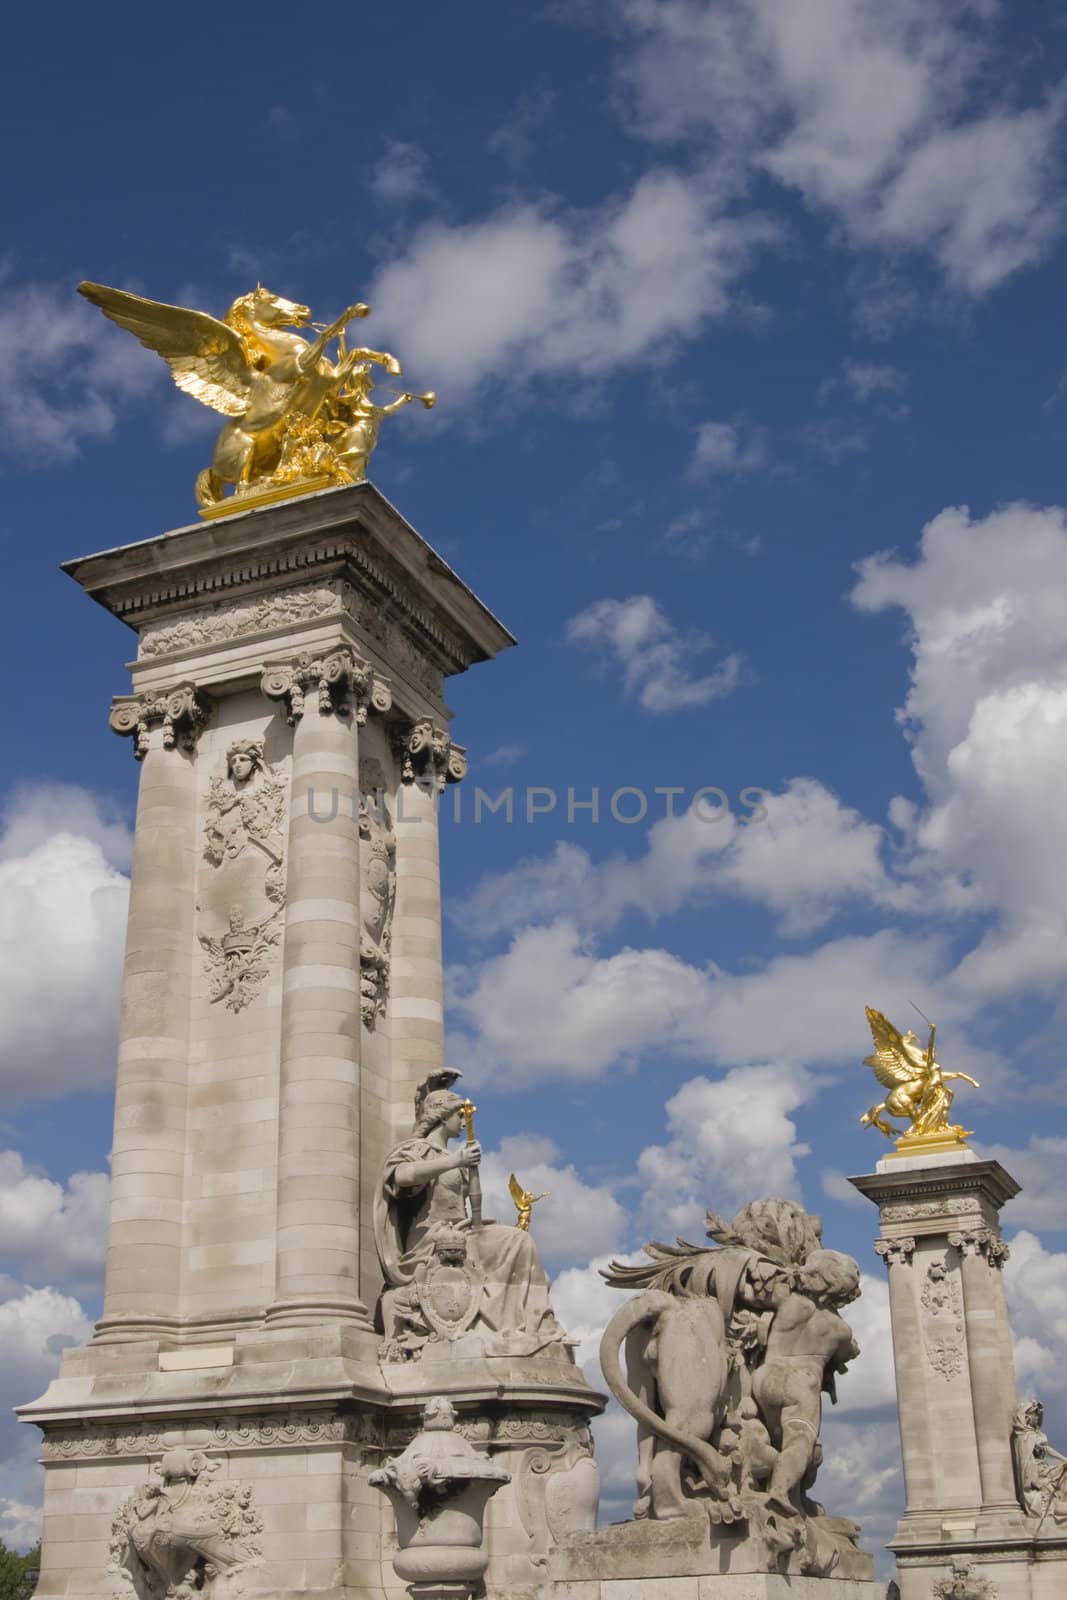 Golden statues of winged horses on top of pillars decorate the Pont Alexandre III in Paris, France.